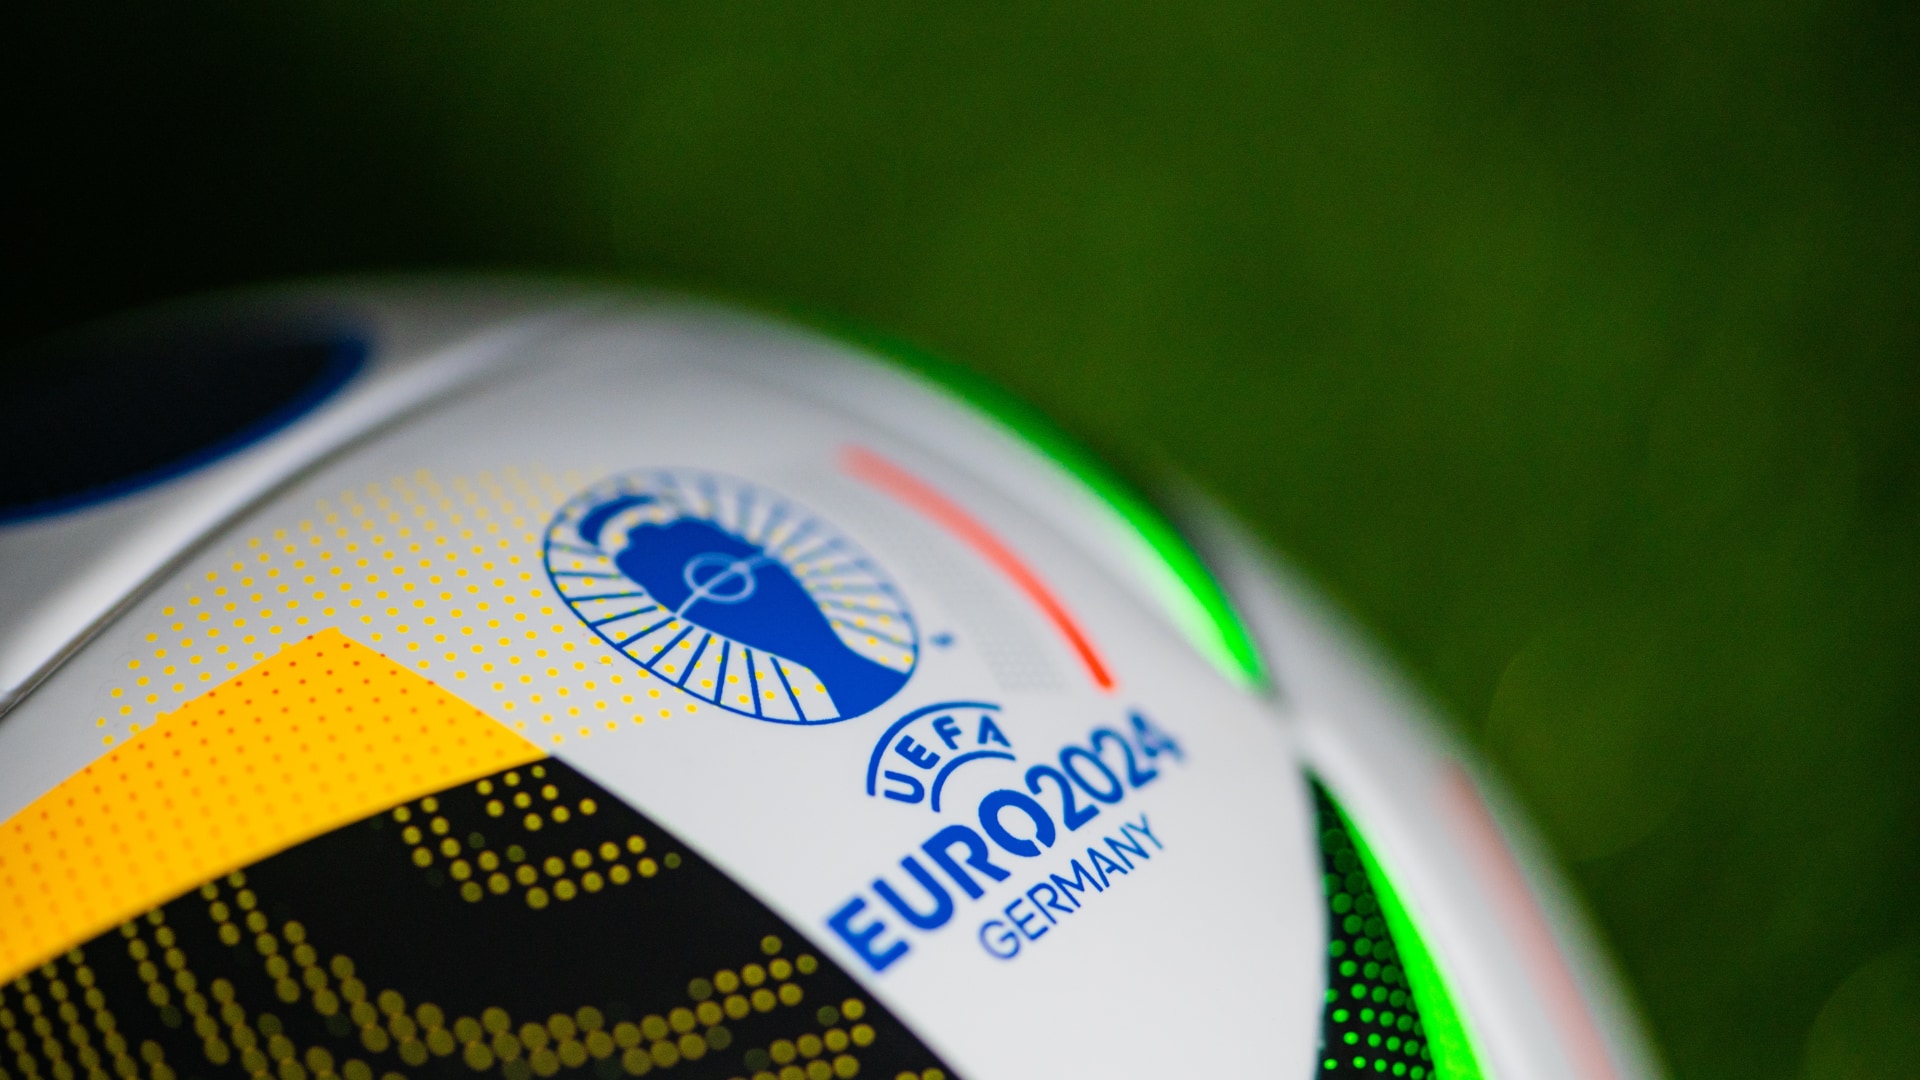 From Dark Reading – Euro 2024 Becomes Latest Sporting Event to Attract Cyberattacks